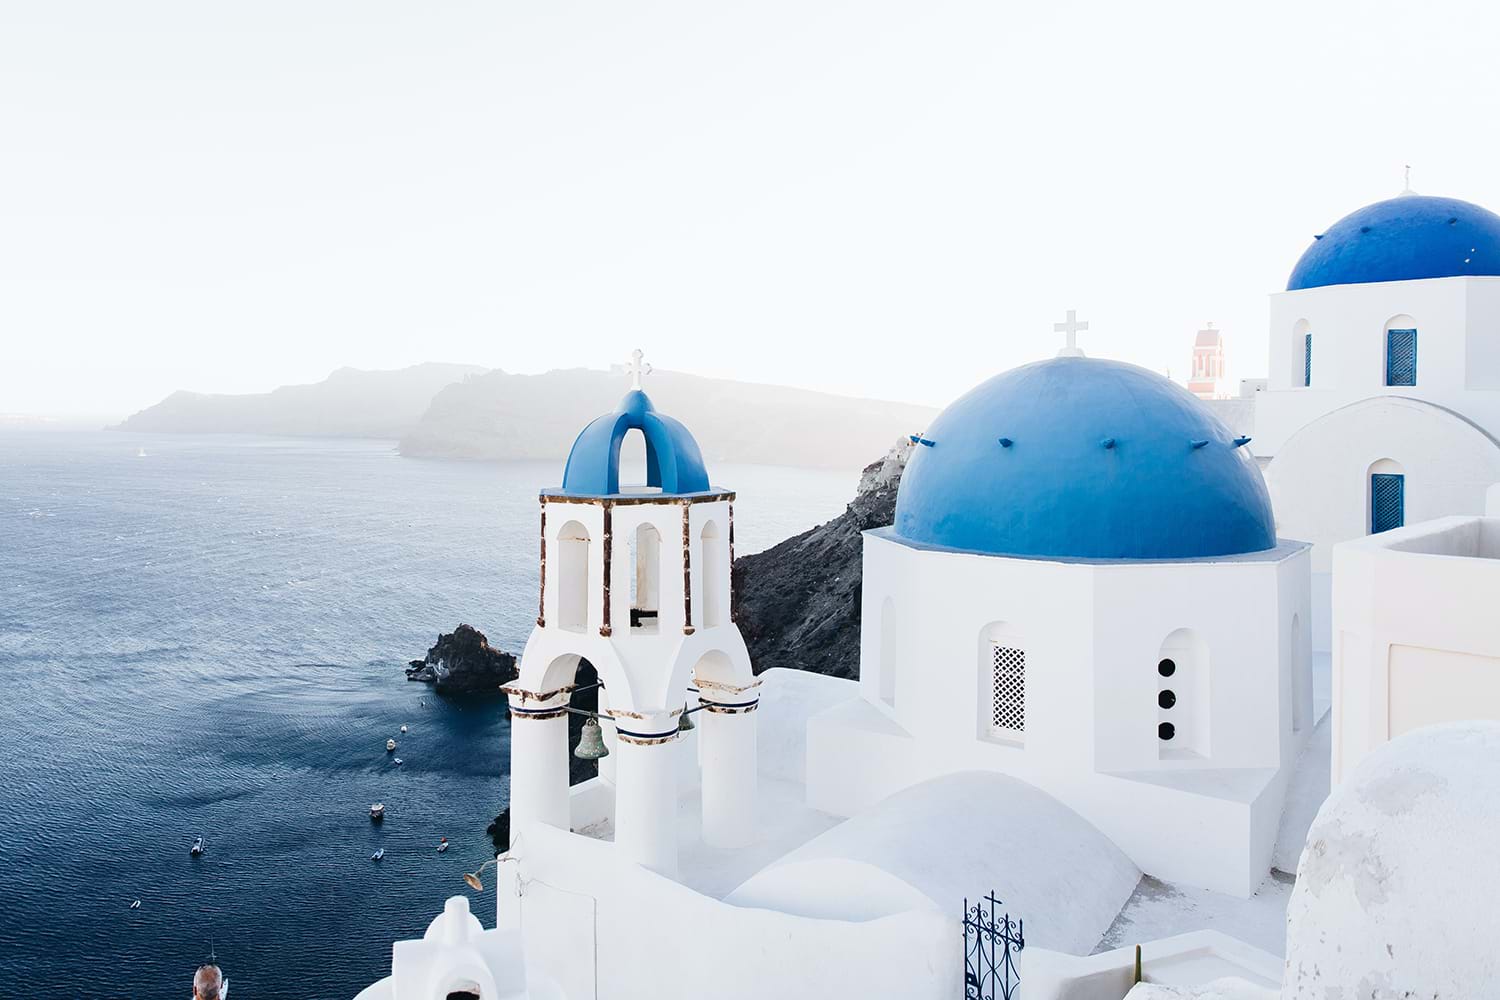 White and blue buildings in Greece